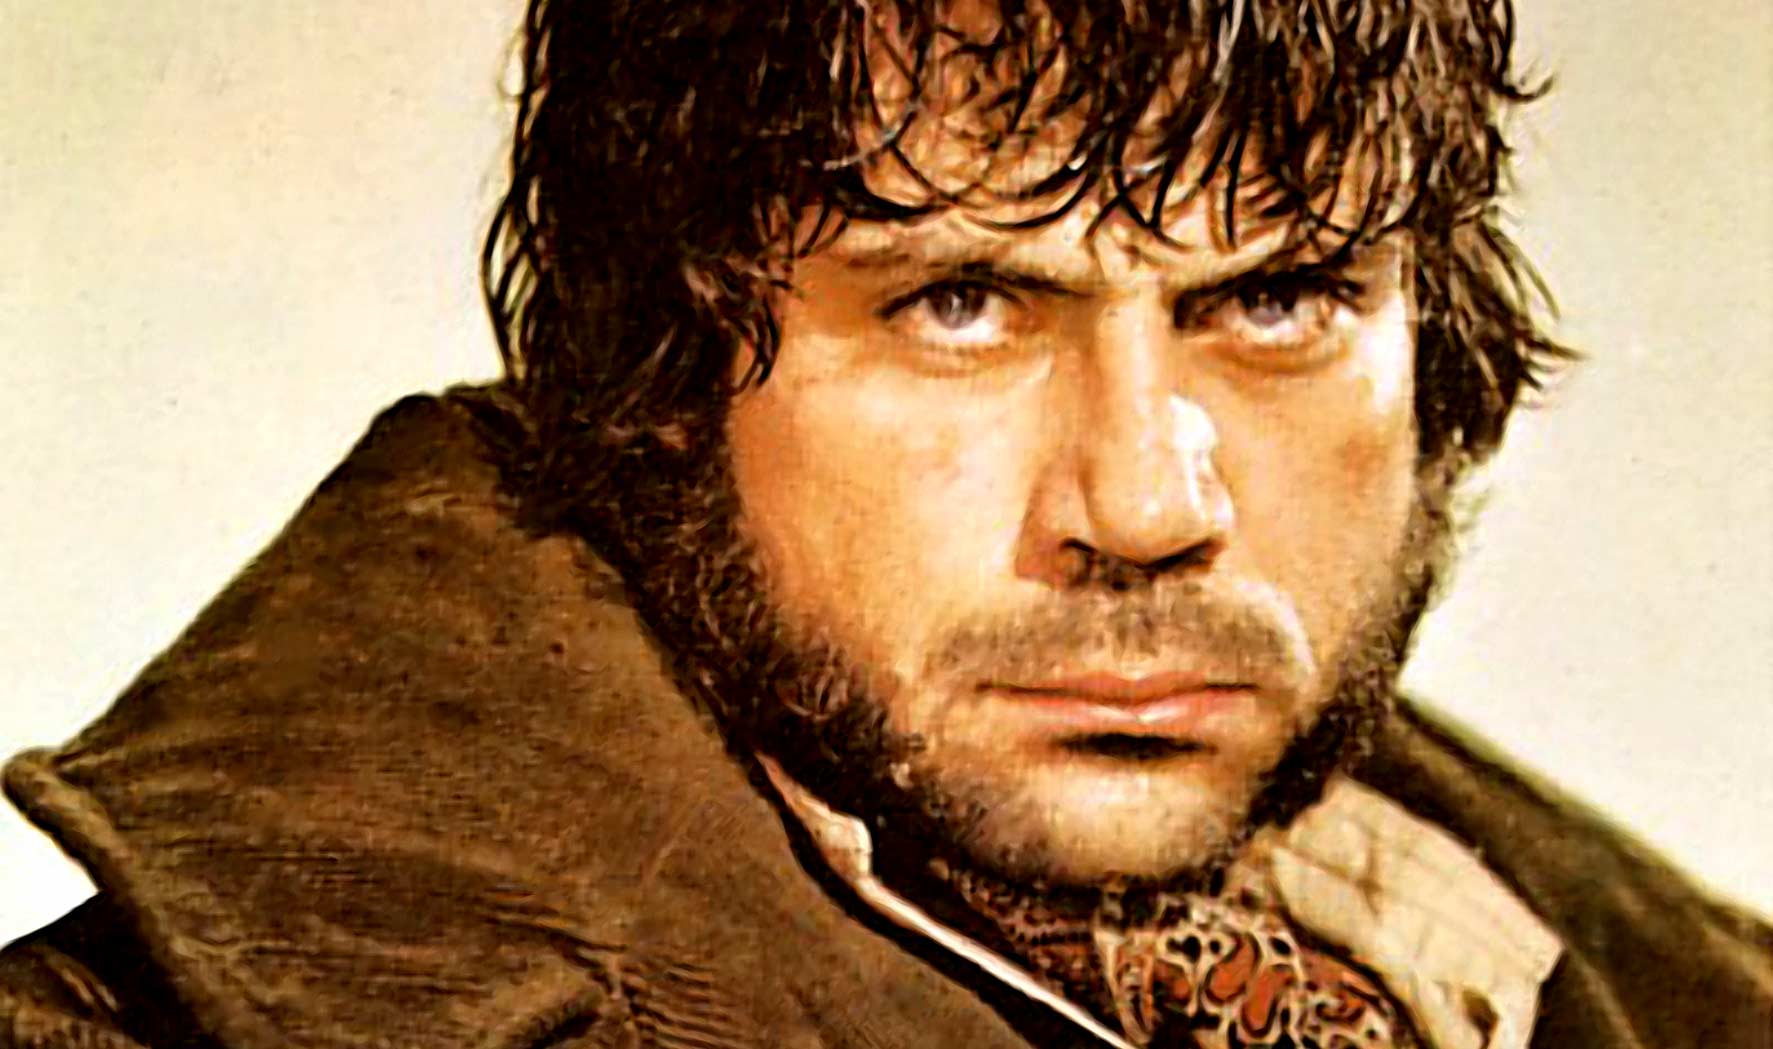 In good spirits: why actor Oliver Reed was always drunk but never